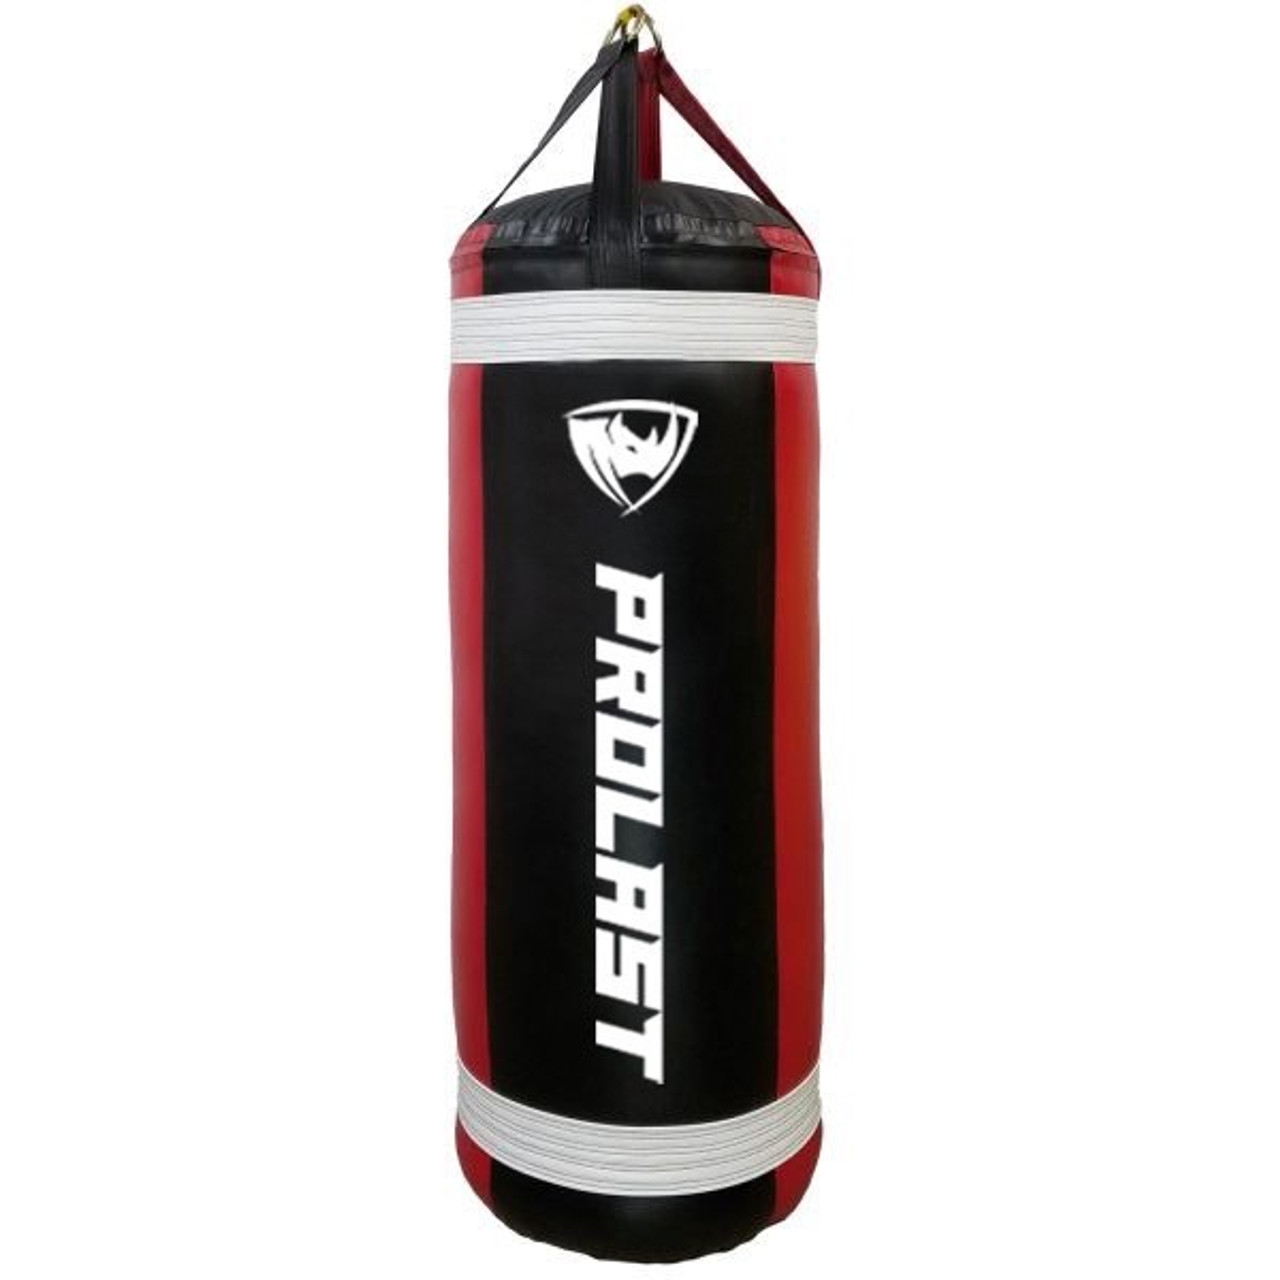 Prolast 4FT XL 135LB Mayweather Style Punching Bag Black // Red // White UNFILLED - Made in USA